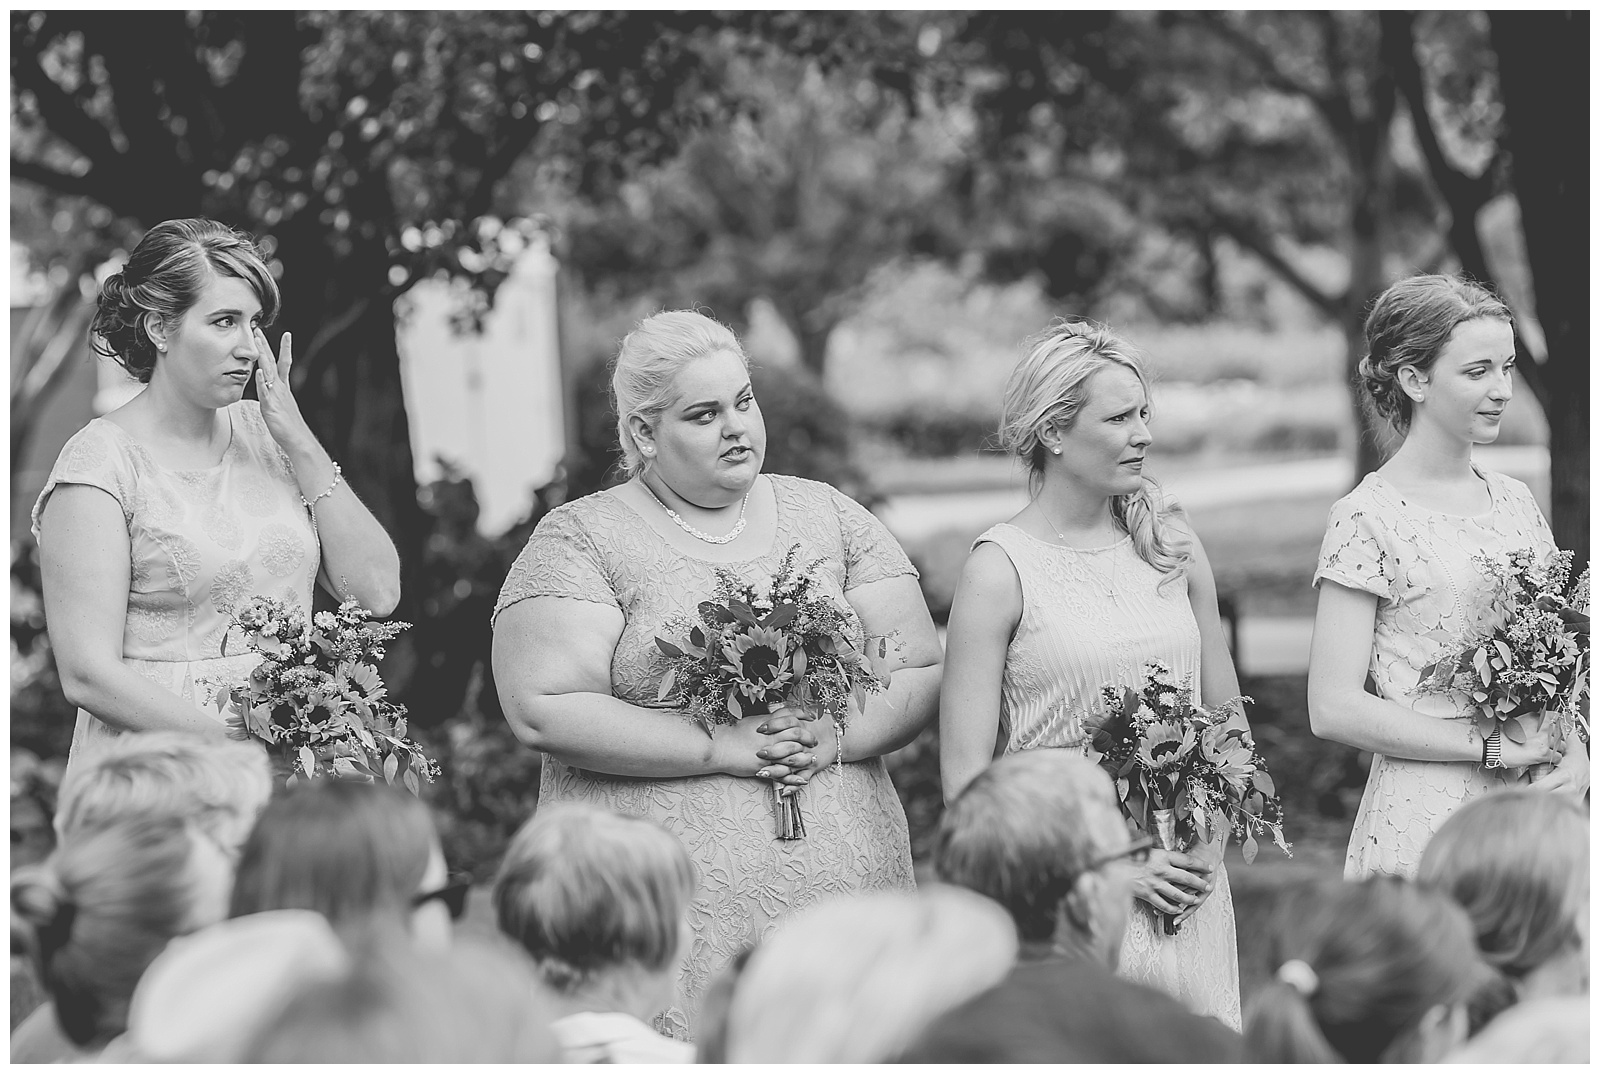 Wedding photography at South Park in Lawrence, Kansas.